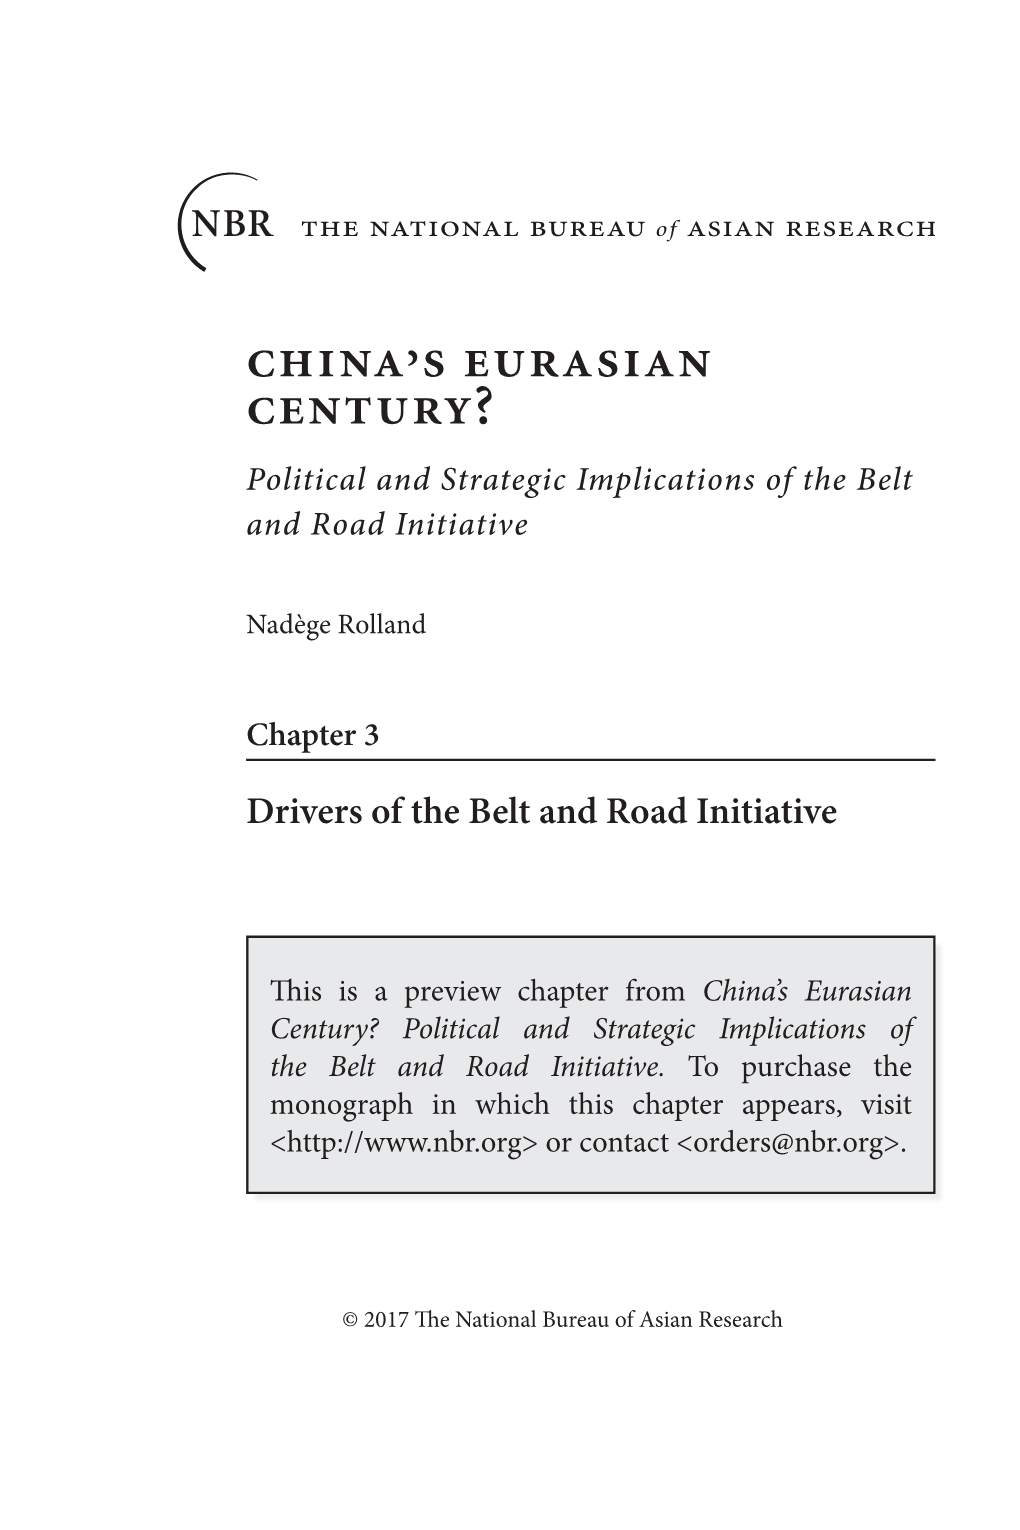 China's Eurasian Century? Political and Strategic Implications of the Belt and Road Initiative, Chapter 3